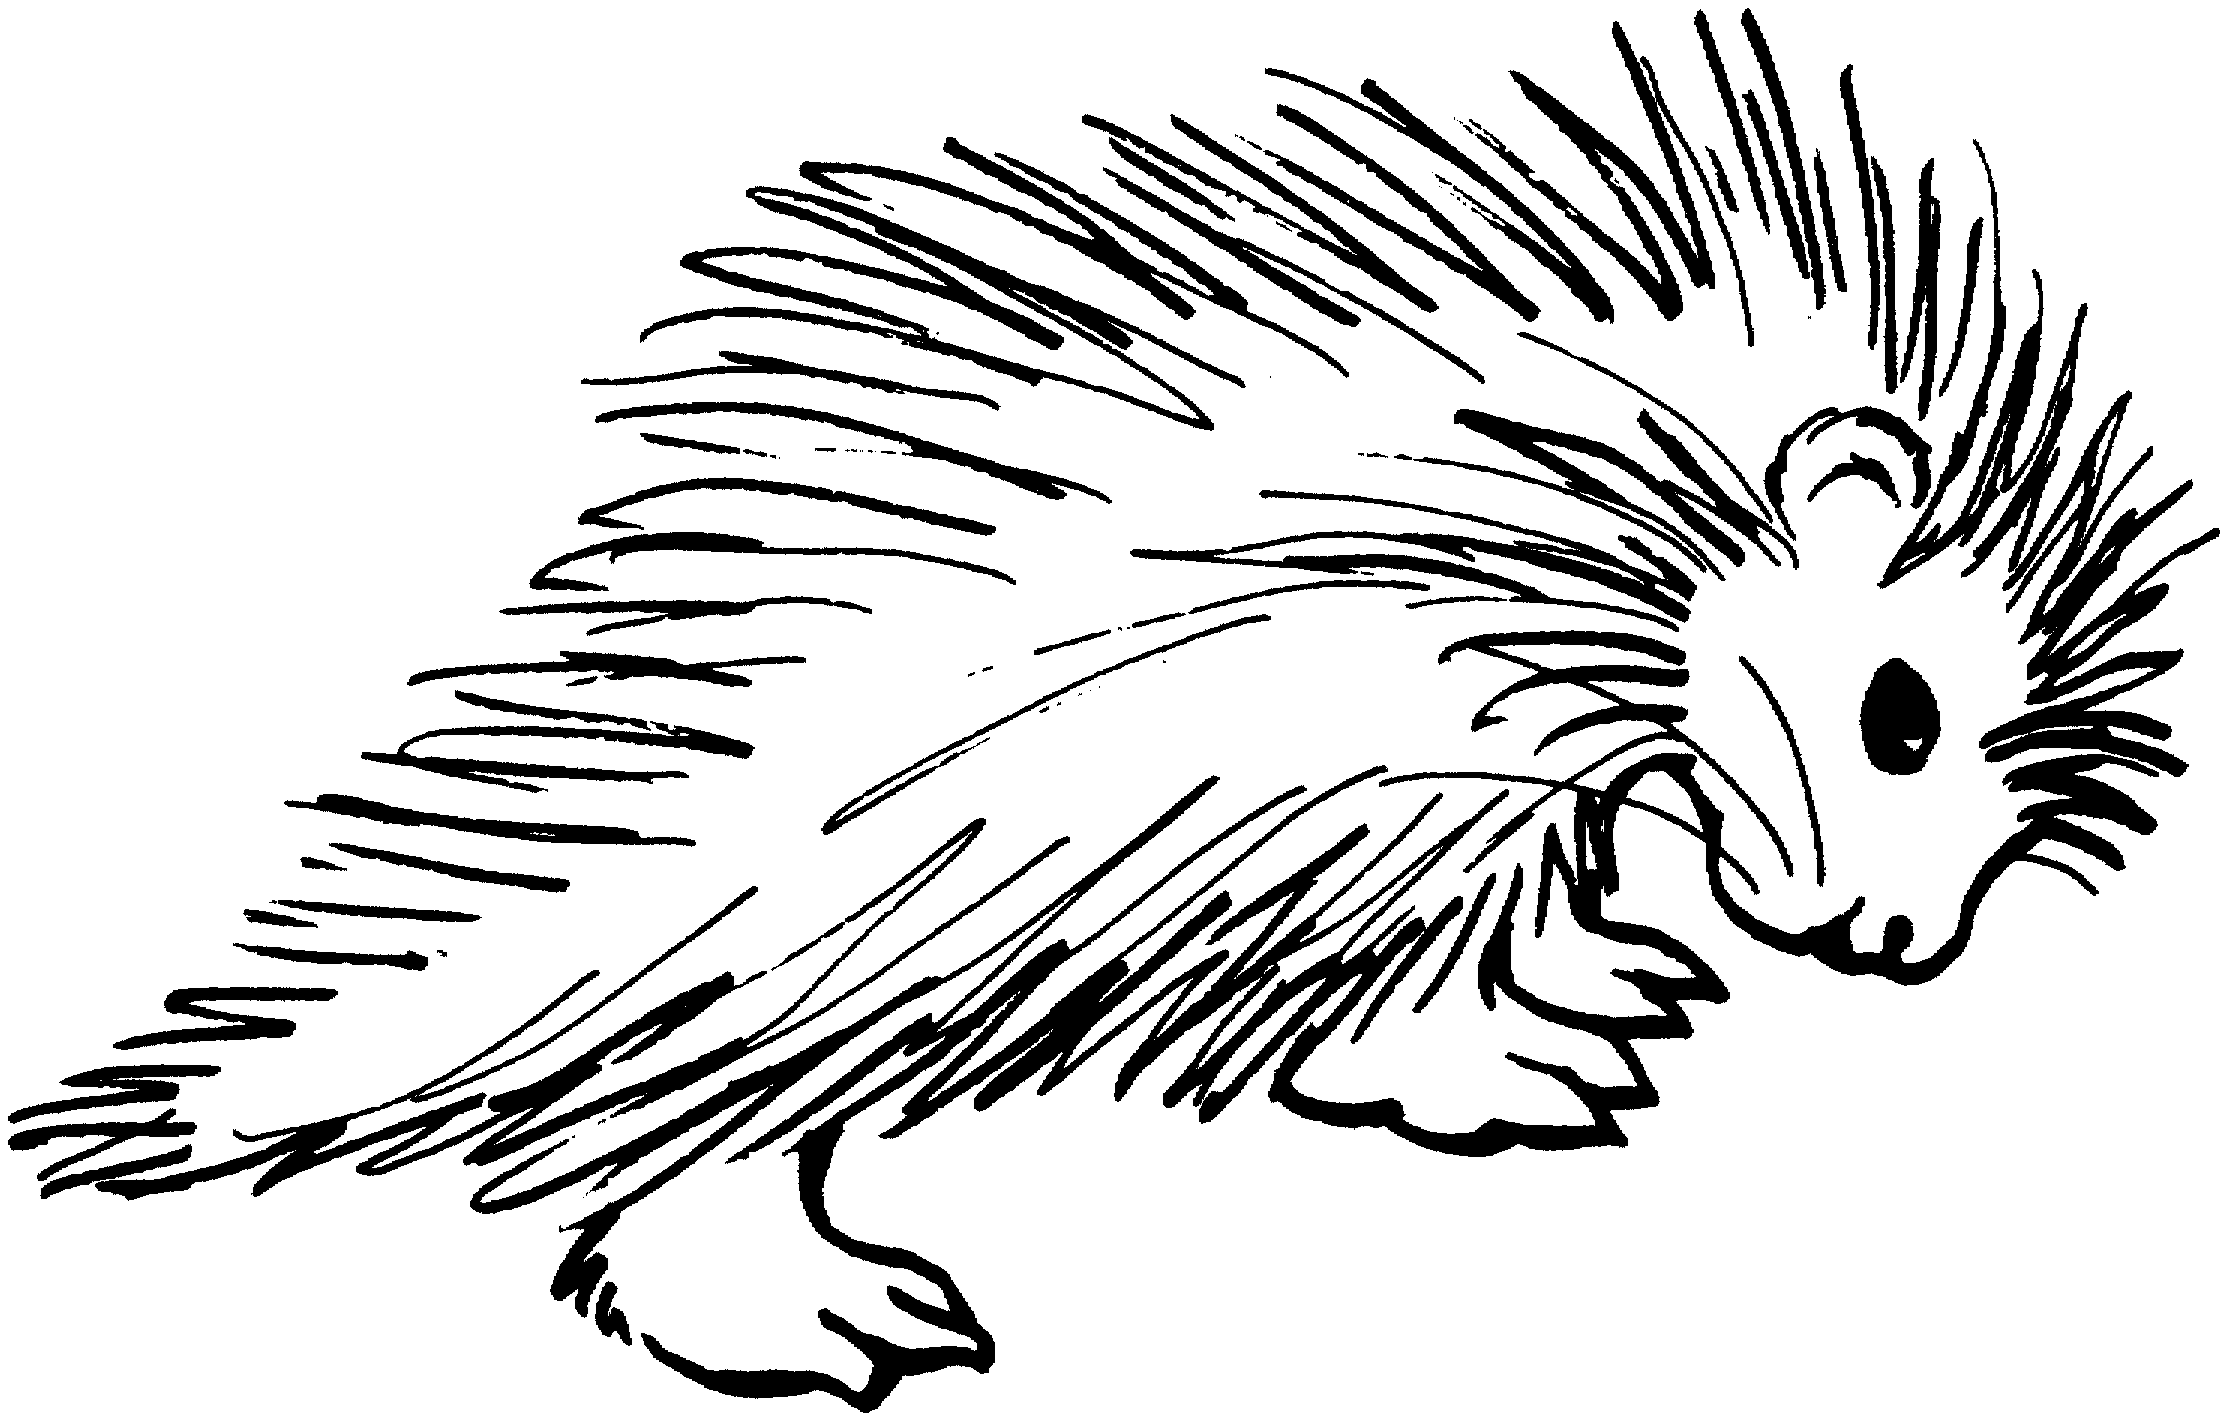 Porcupine coloring #11, Download drawings